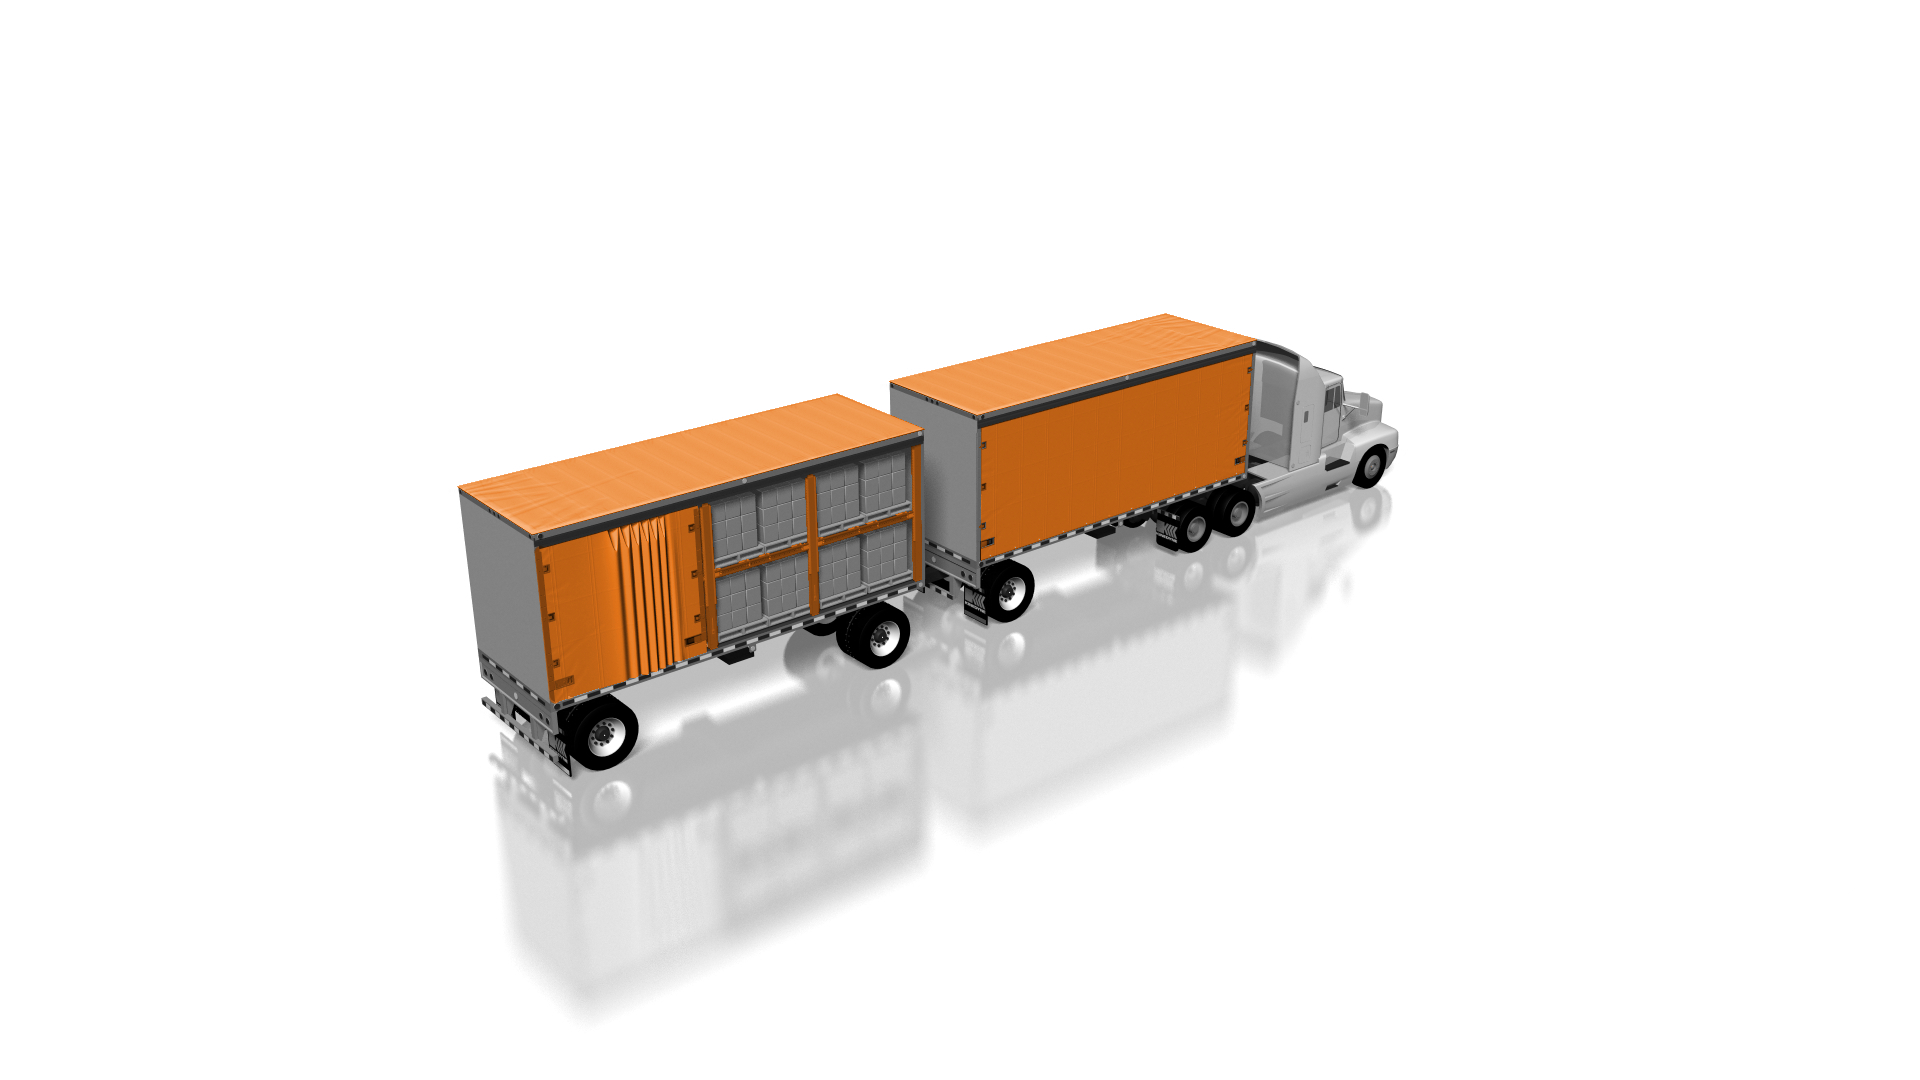 The double-decking system maximizes load density, allowing loading and unloading access of both cargo levels from the sides and rear, and all of its components conveniently stow in the trailer.